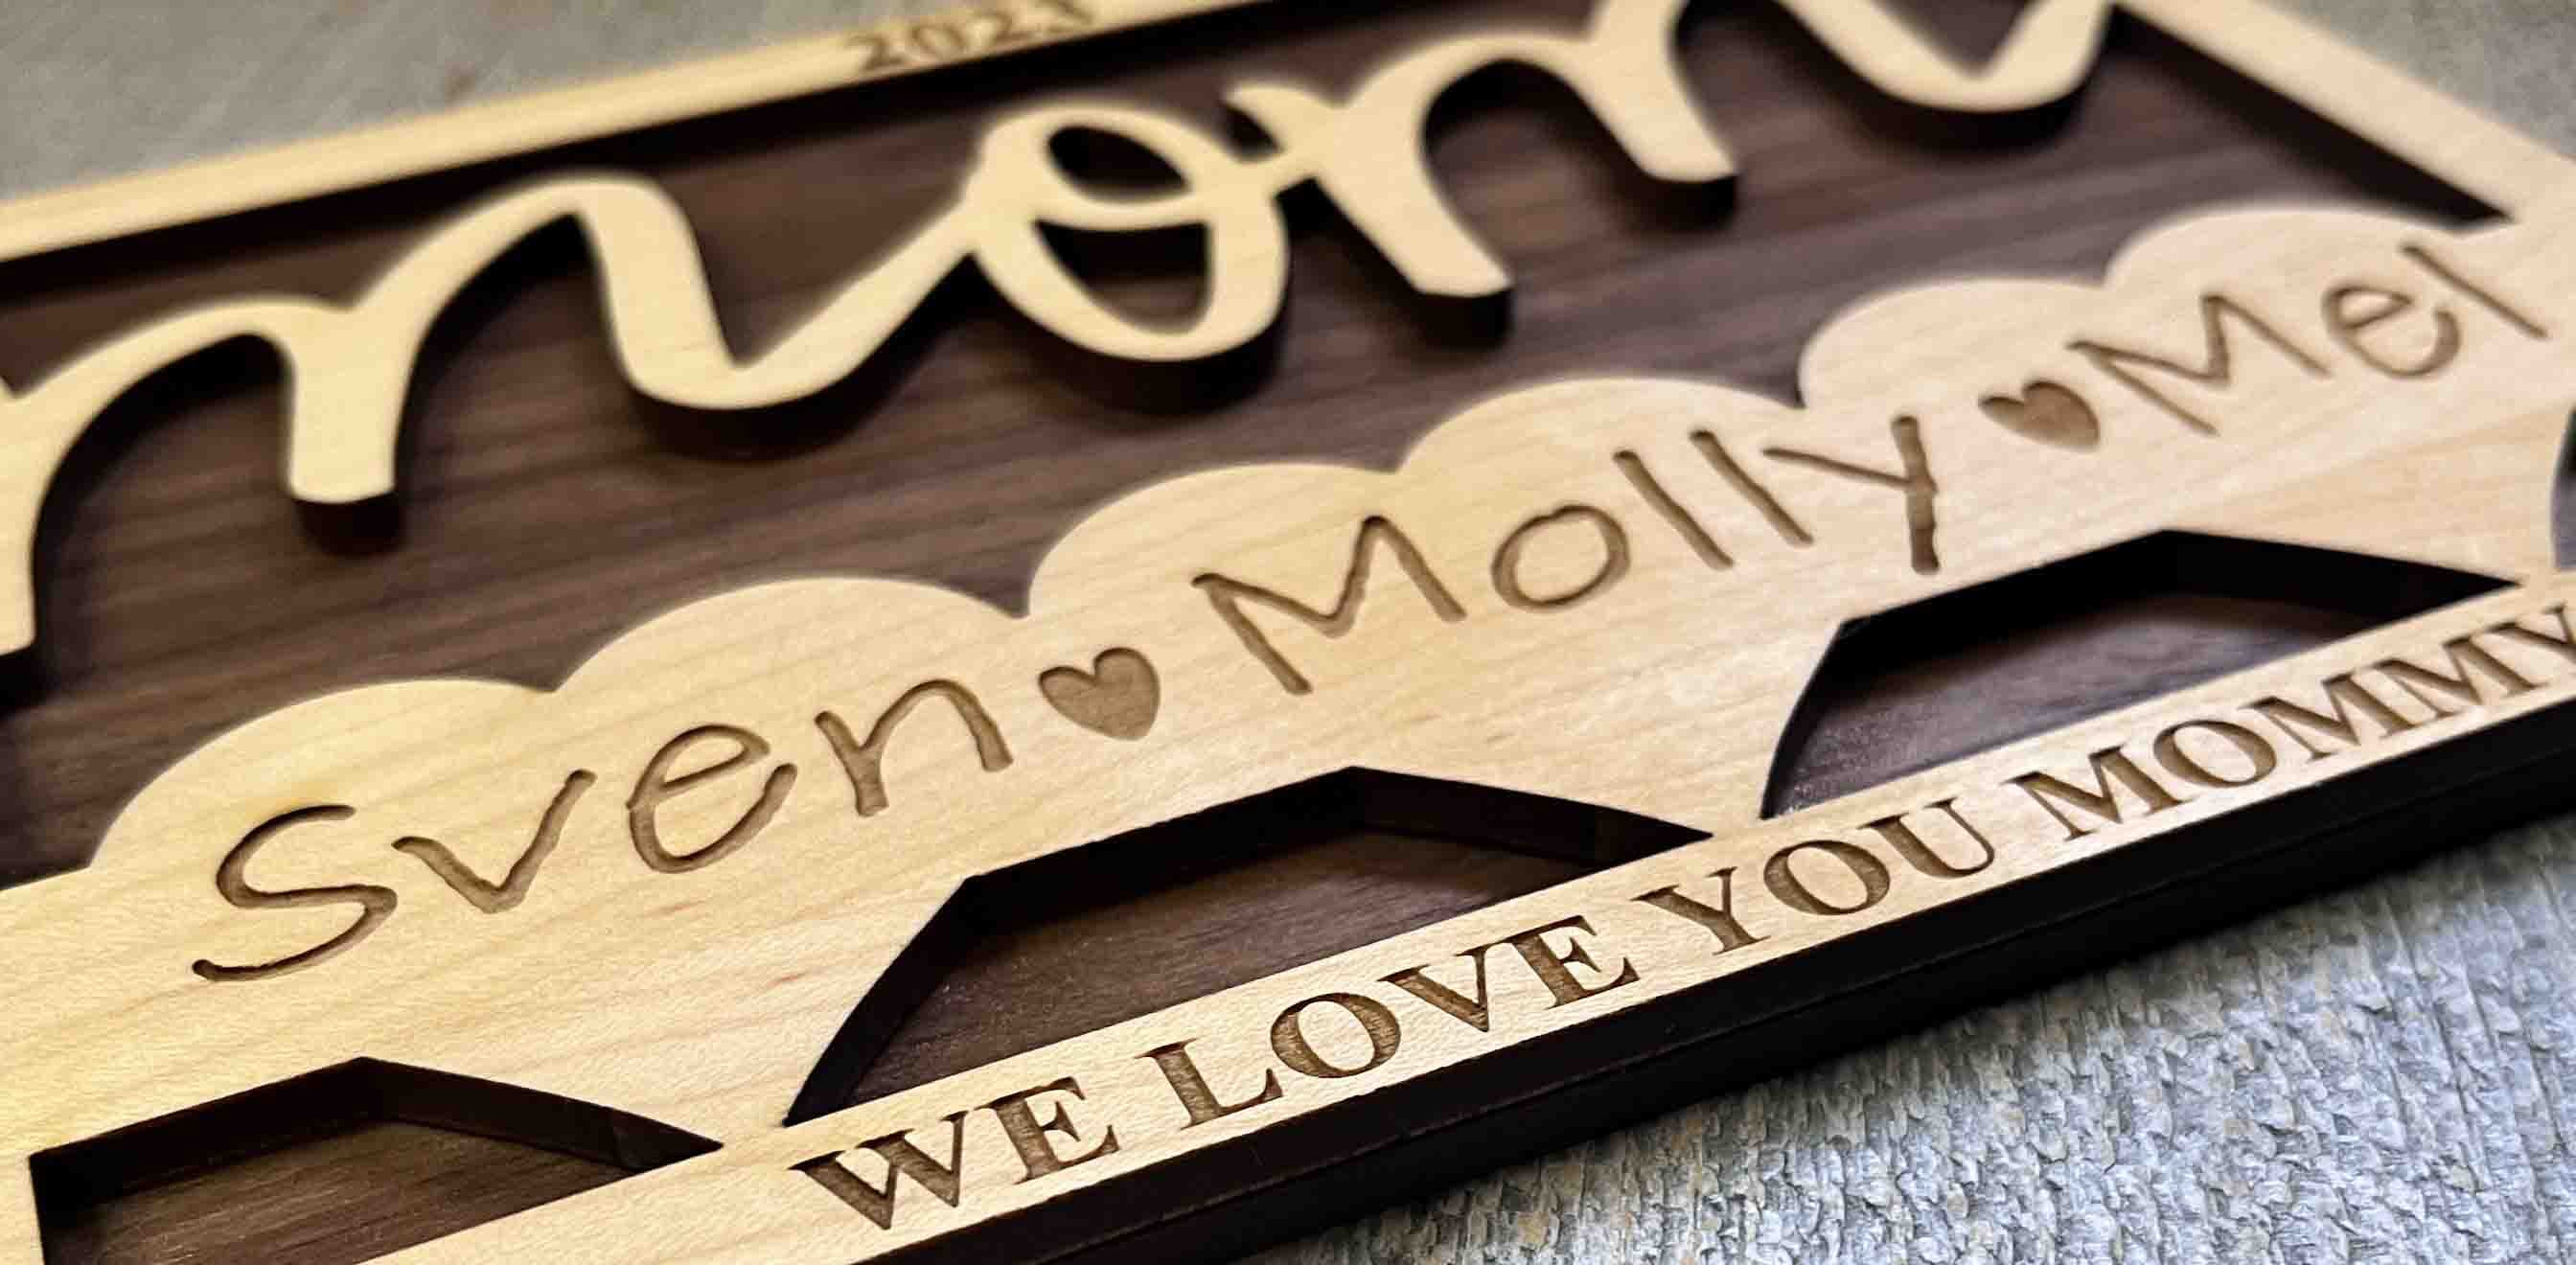 Mother's Day Wooden Card.